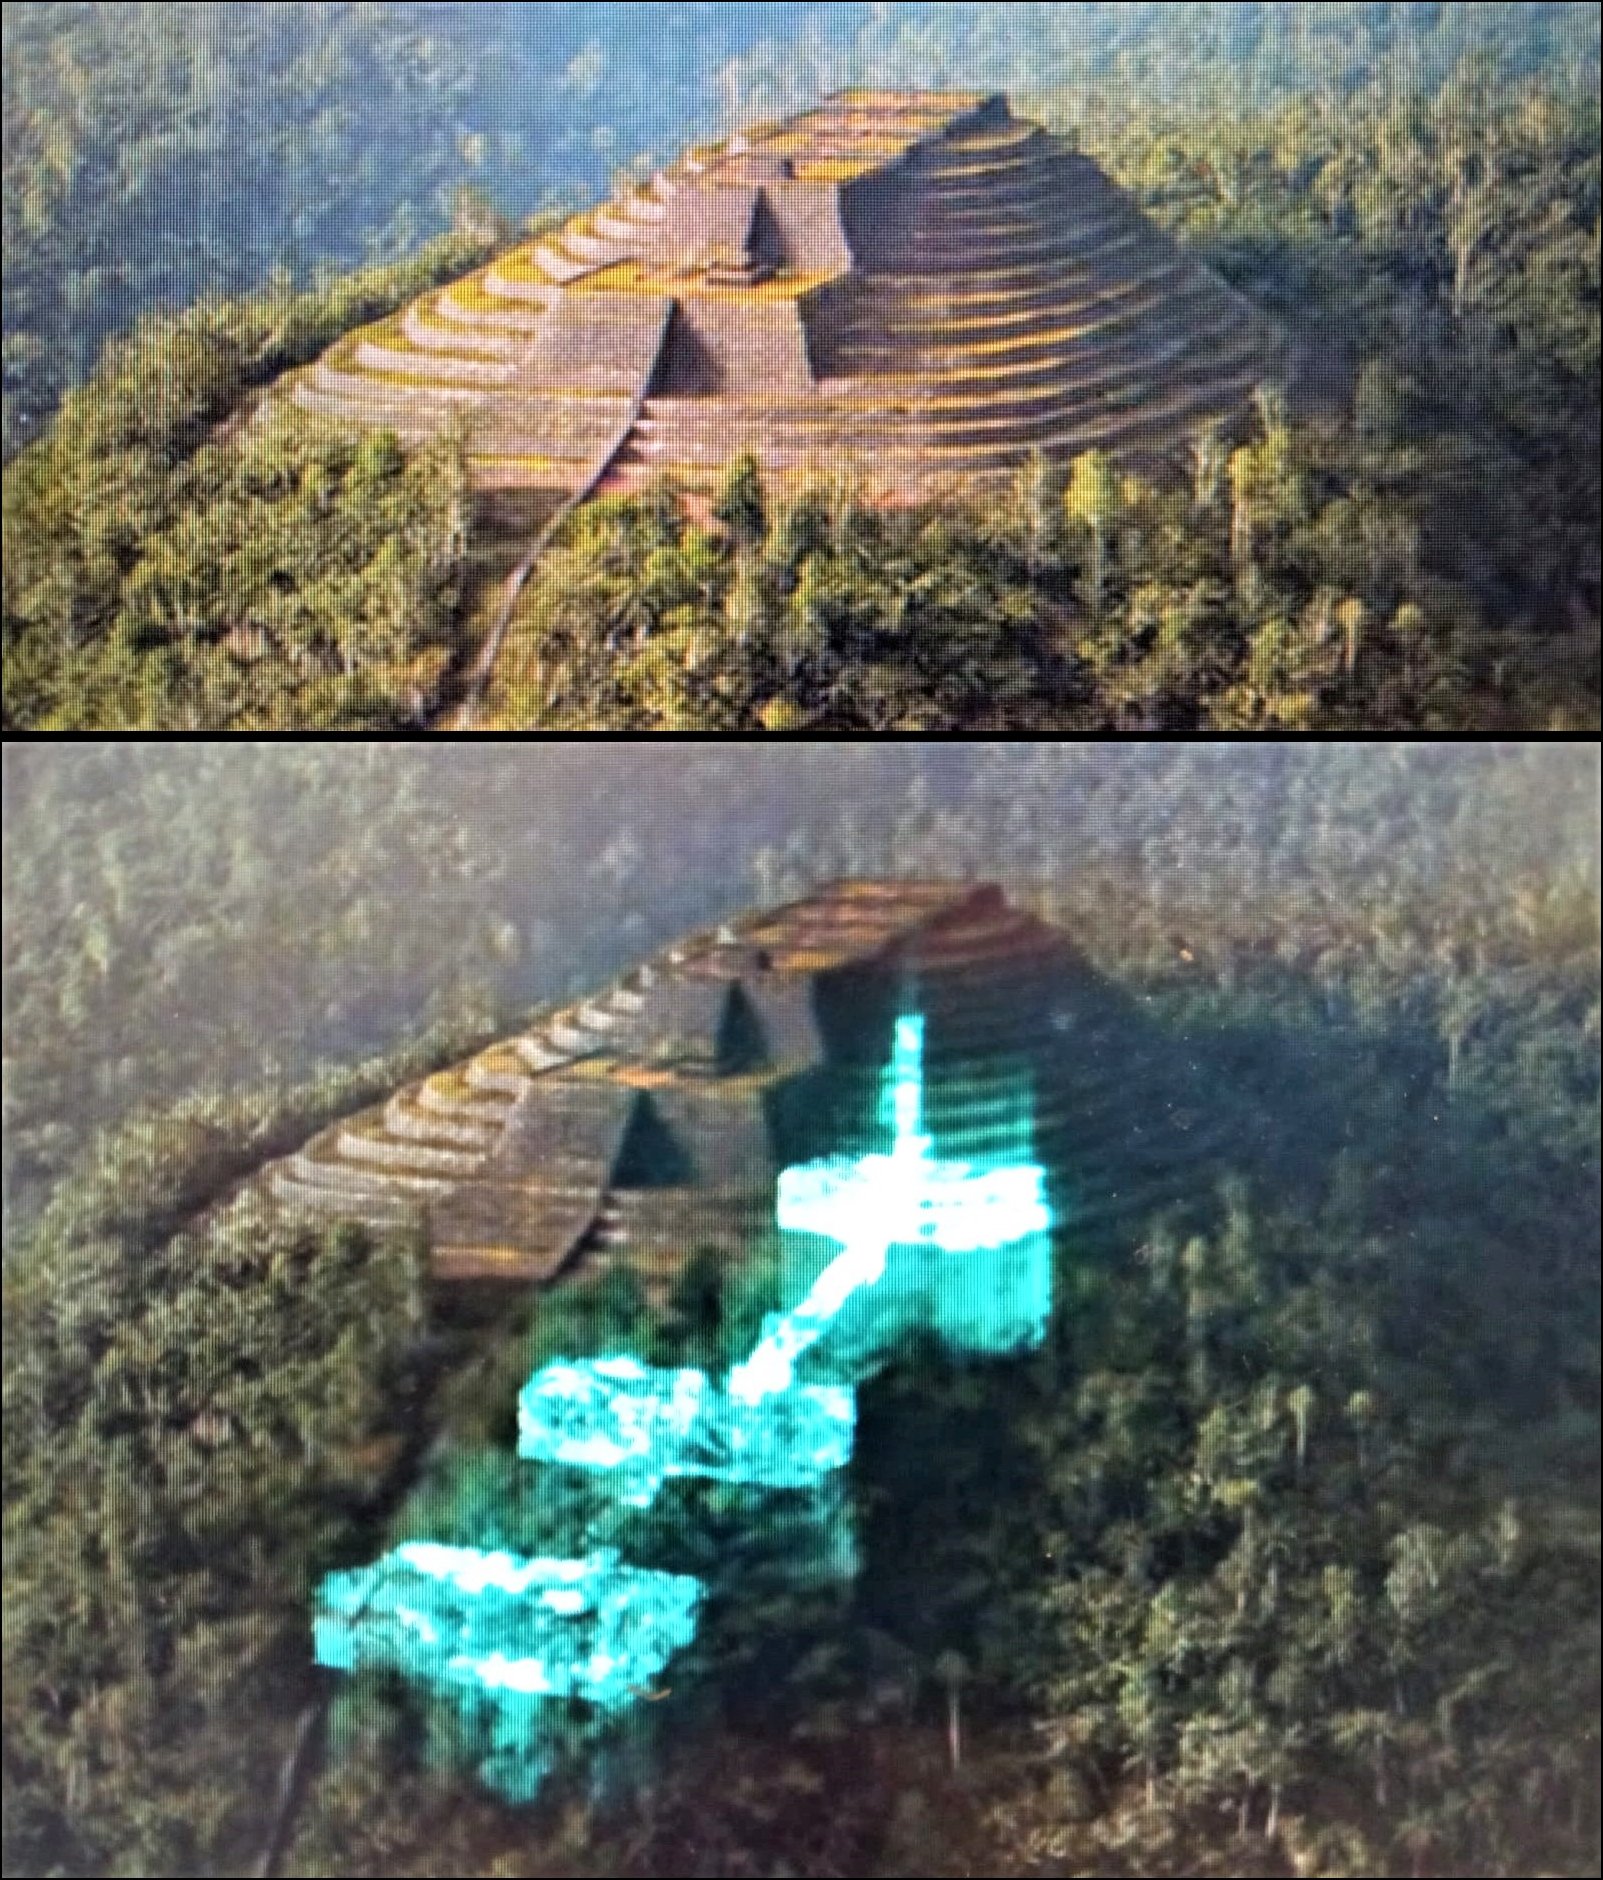 What you see in this photo is a reconstruction of the oldest pyramid in the world, and it is located Gunung Padang, Indonesia. - DAILY NEWS